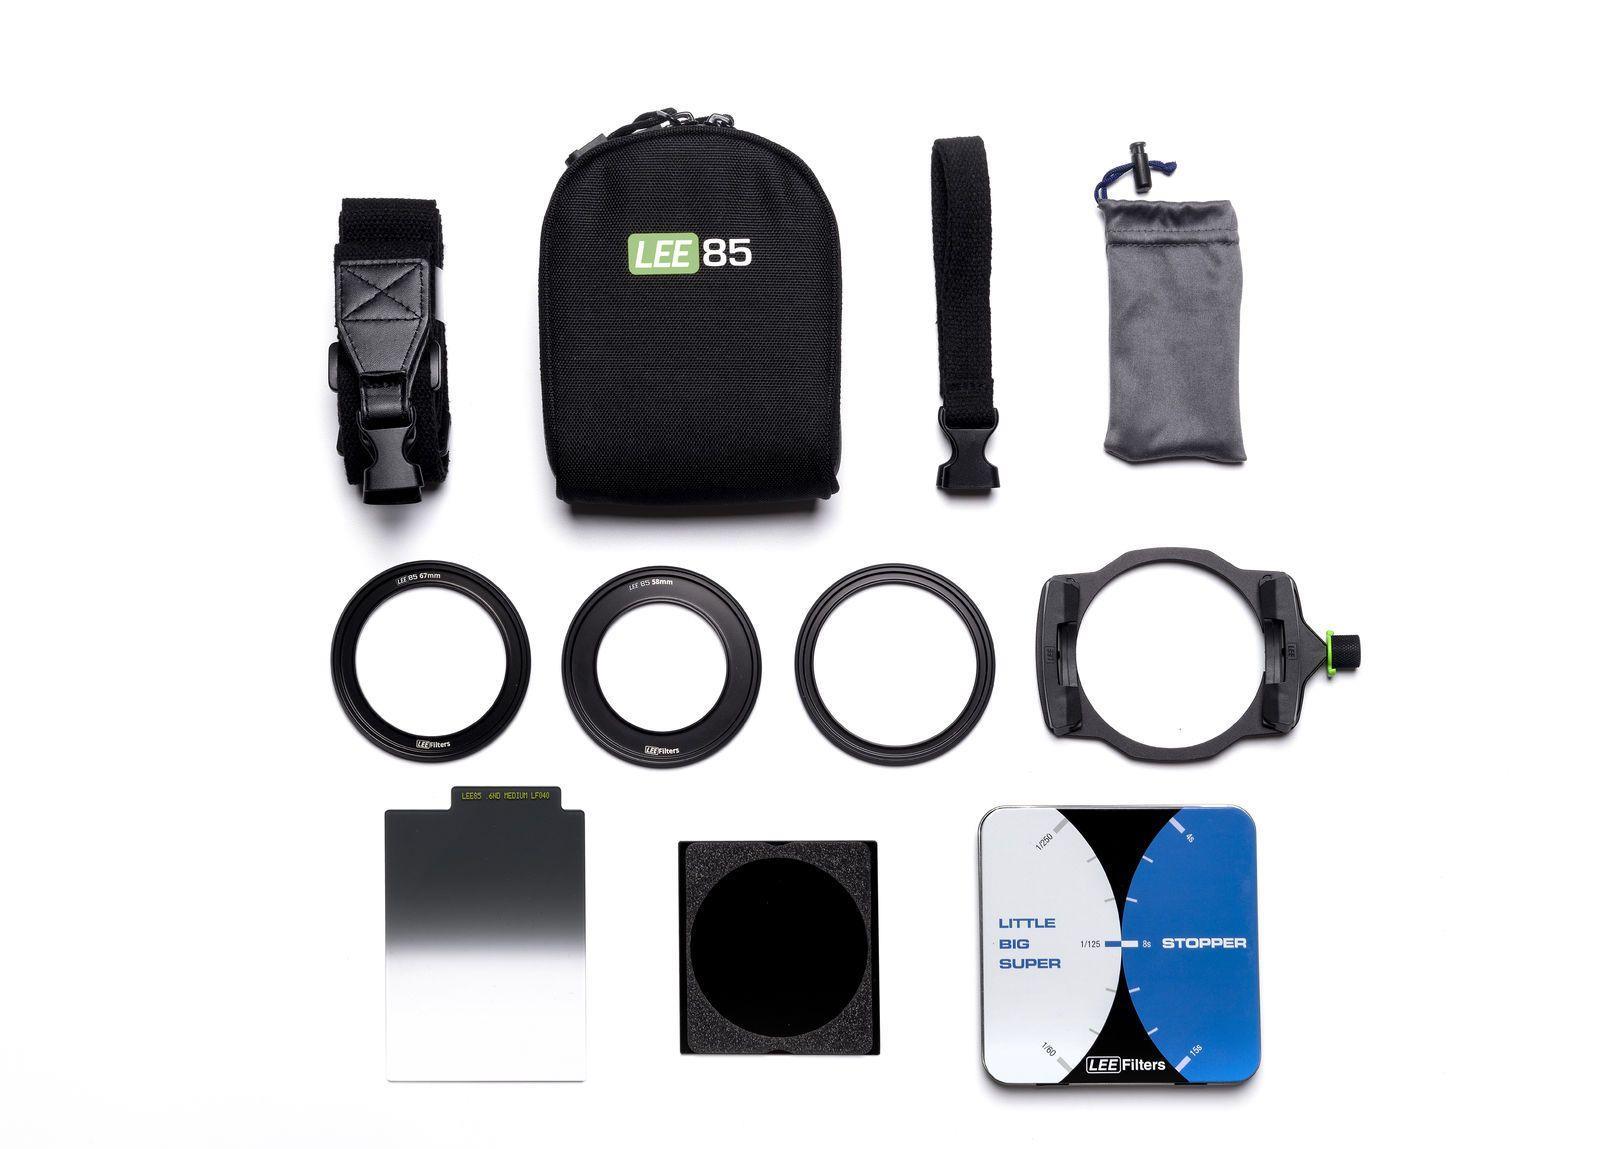 Lee Filters LEE85K2 Develop Photography Kit for Smaller Bodied Camera